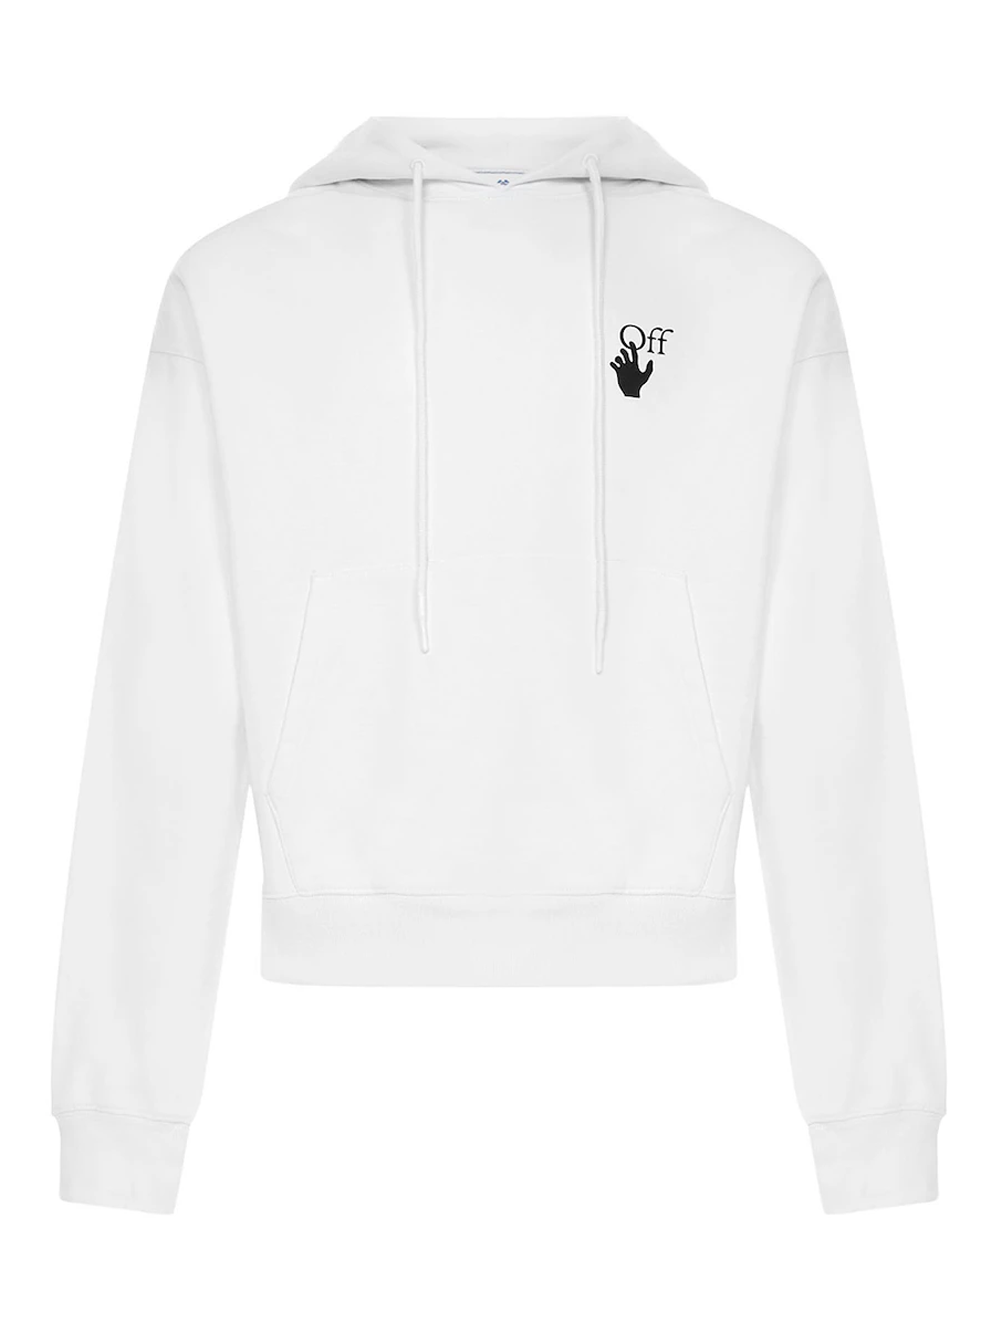 Off-White Caravaggio Lute Painting Printed Hoodie in White